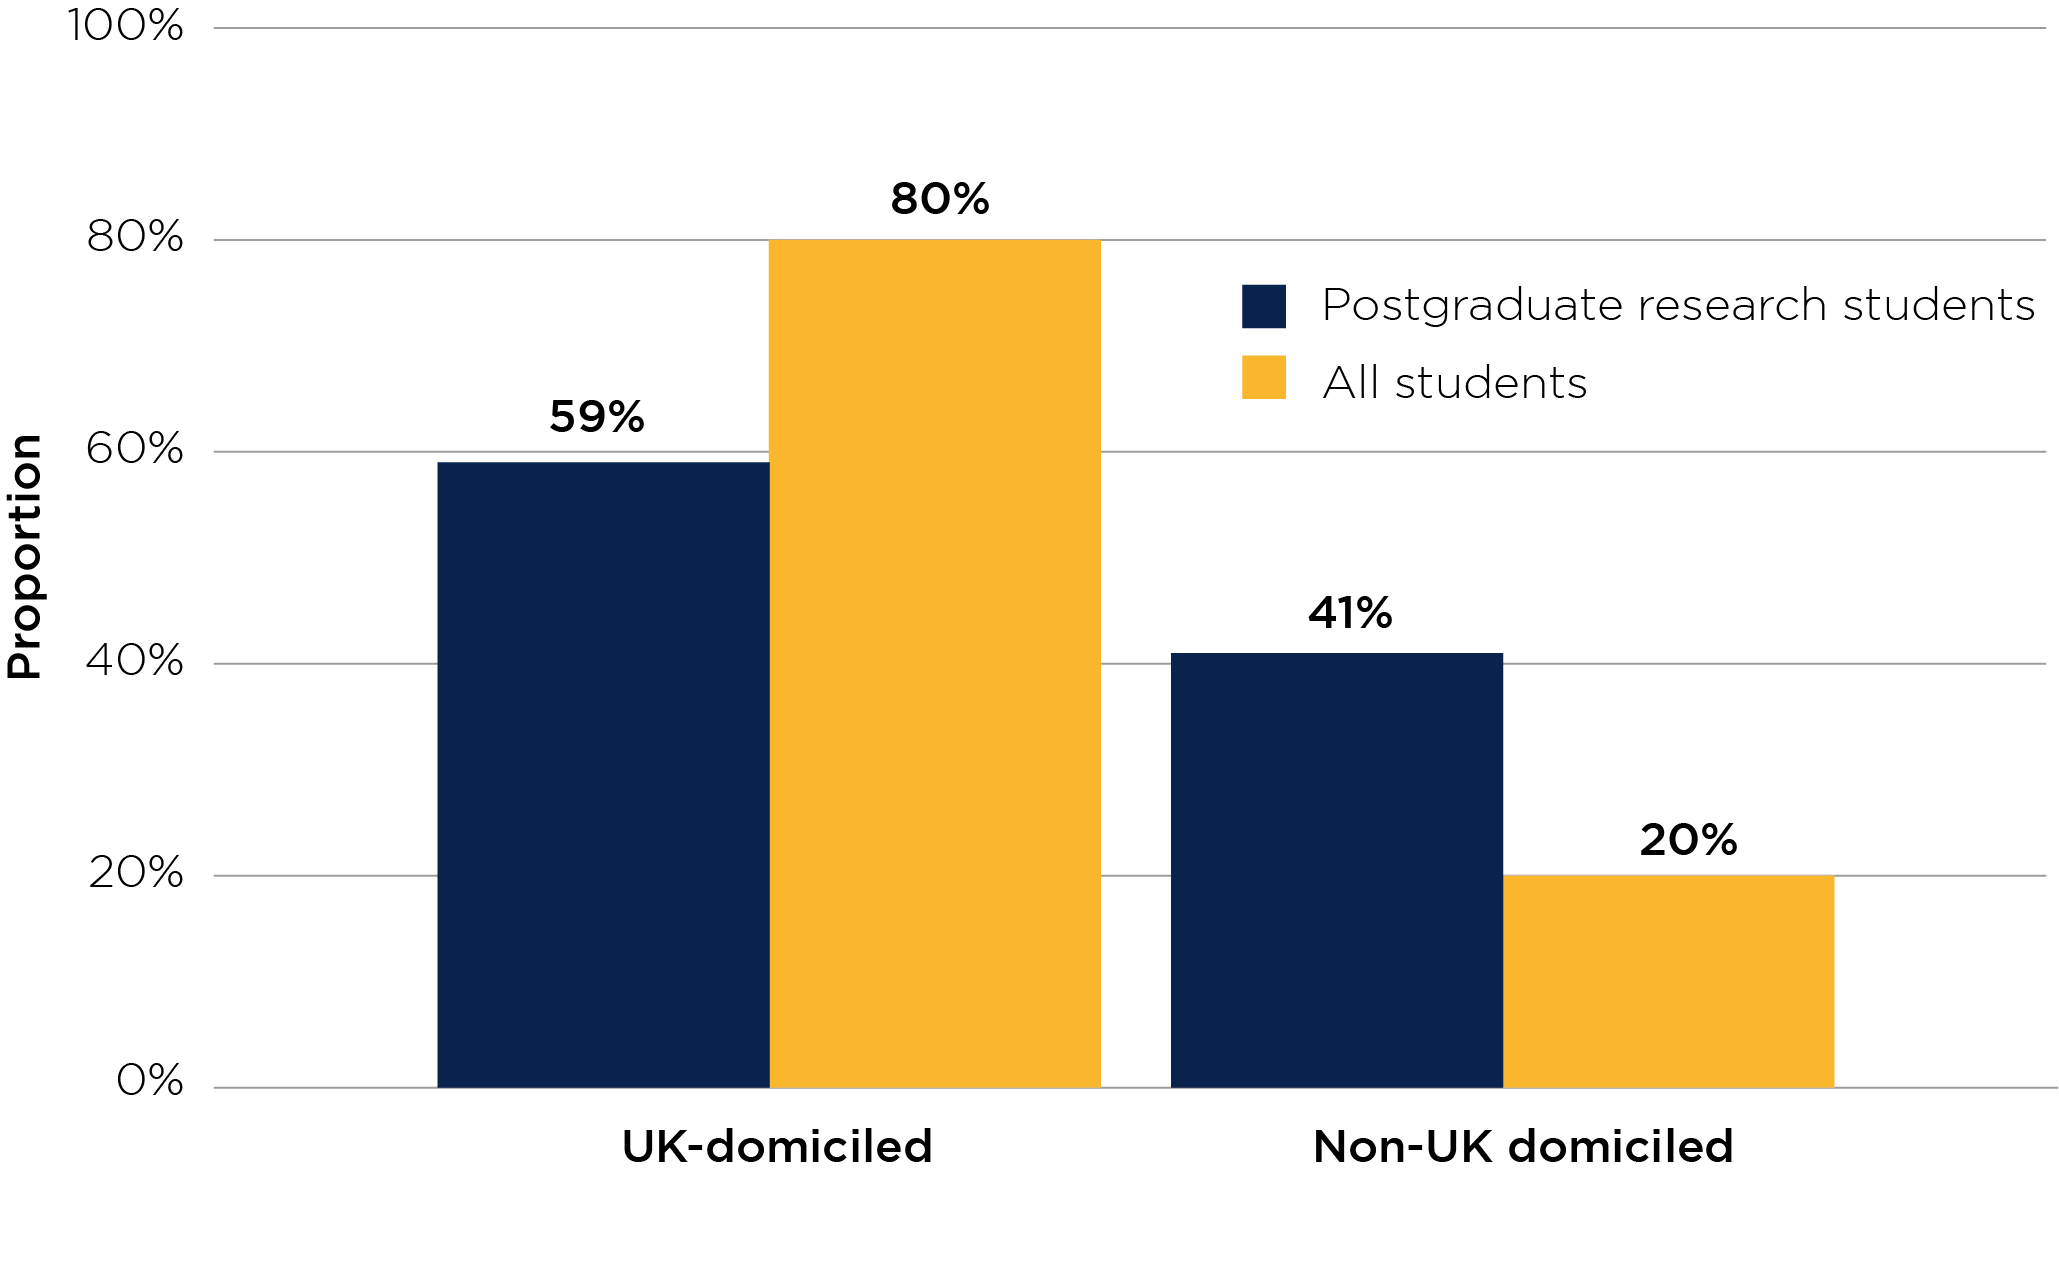 Figure 2: Proportions of postgraduate research students by domicile compared with all students (2018-19)